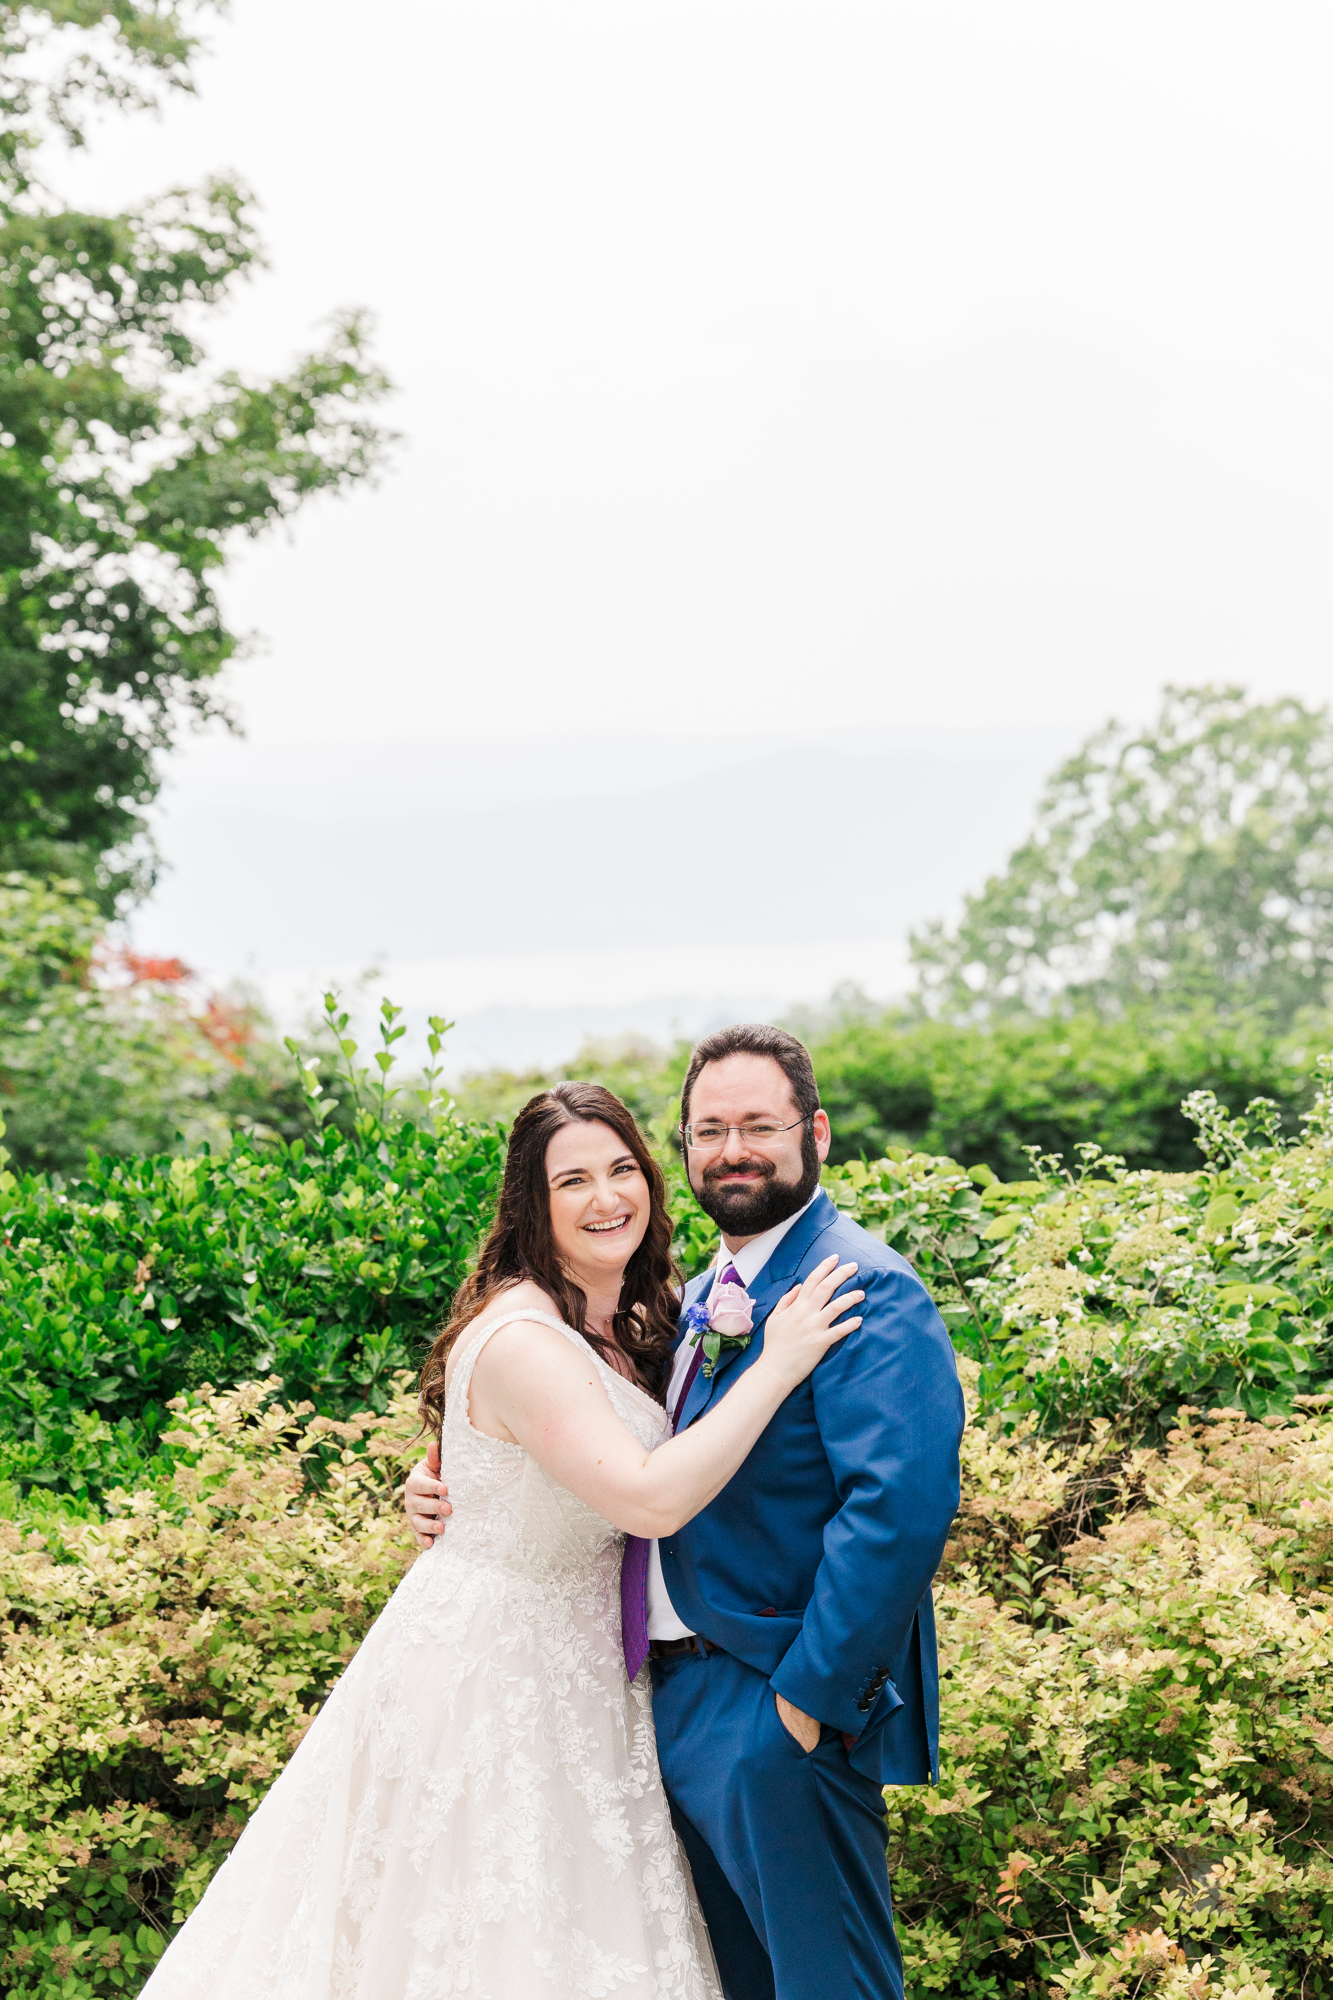 Whimsical Briarcliff Manor Wedding